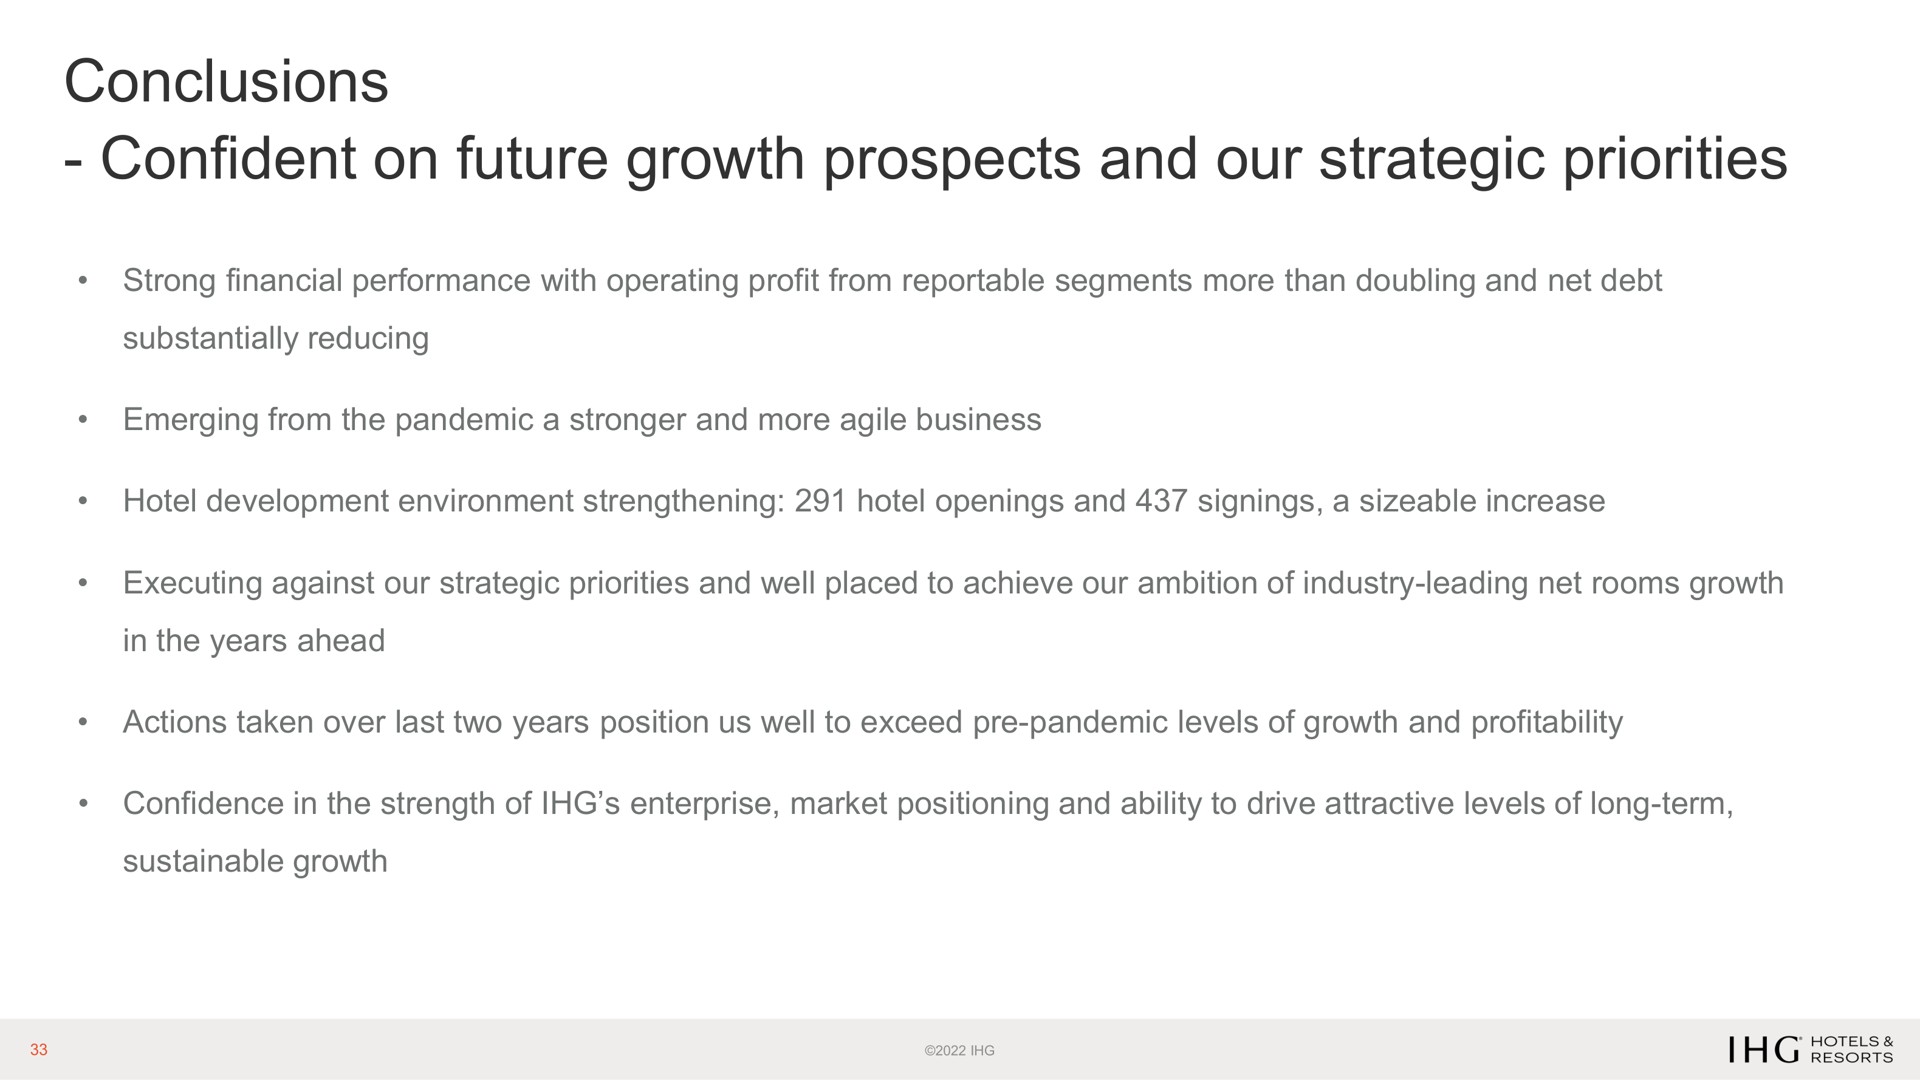 conclusions confident on future growth prospects and our strategic priorities | IHG Hotels